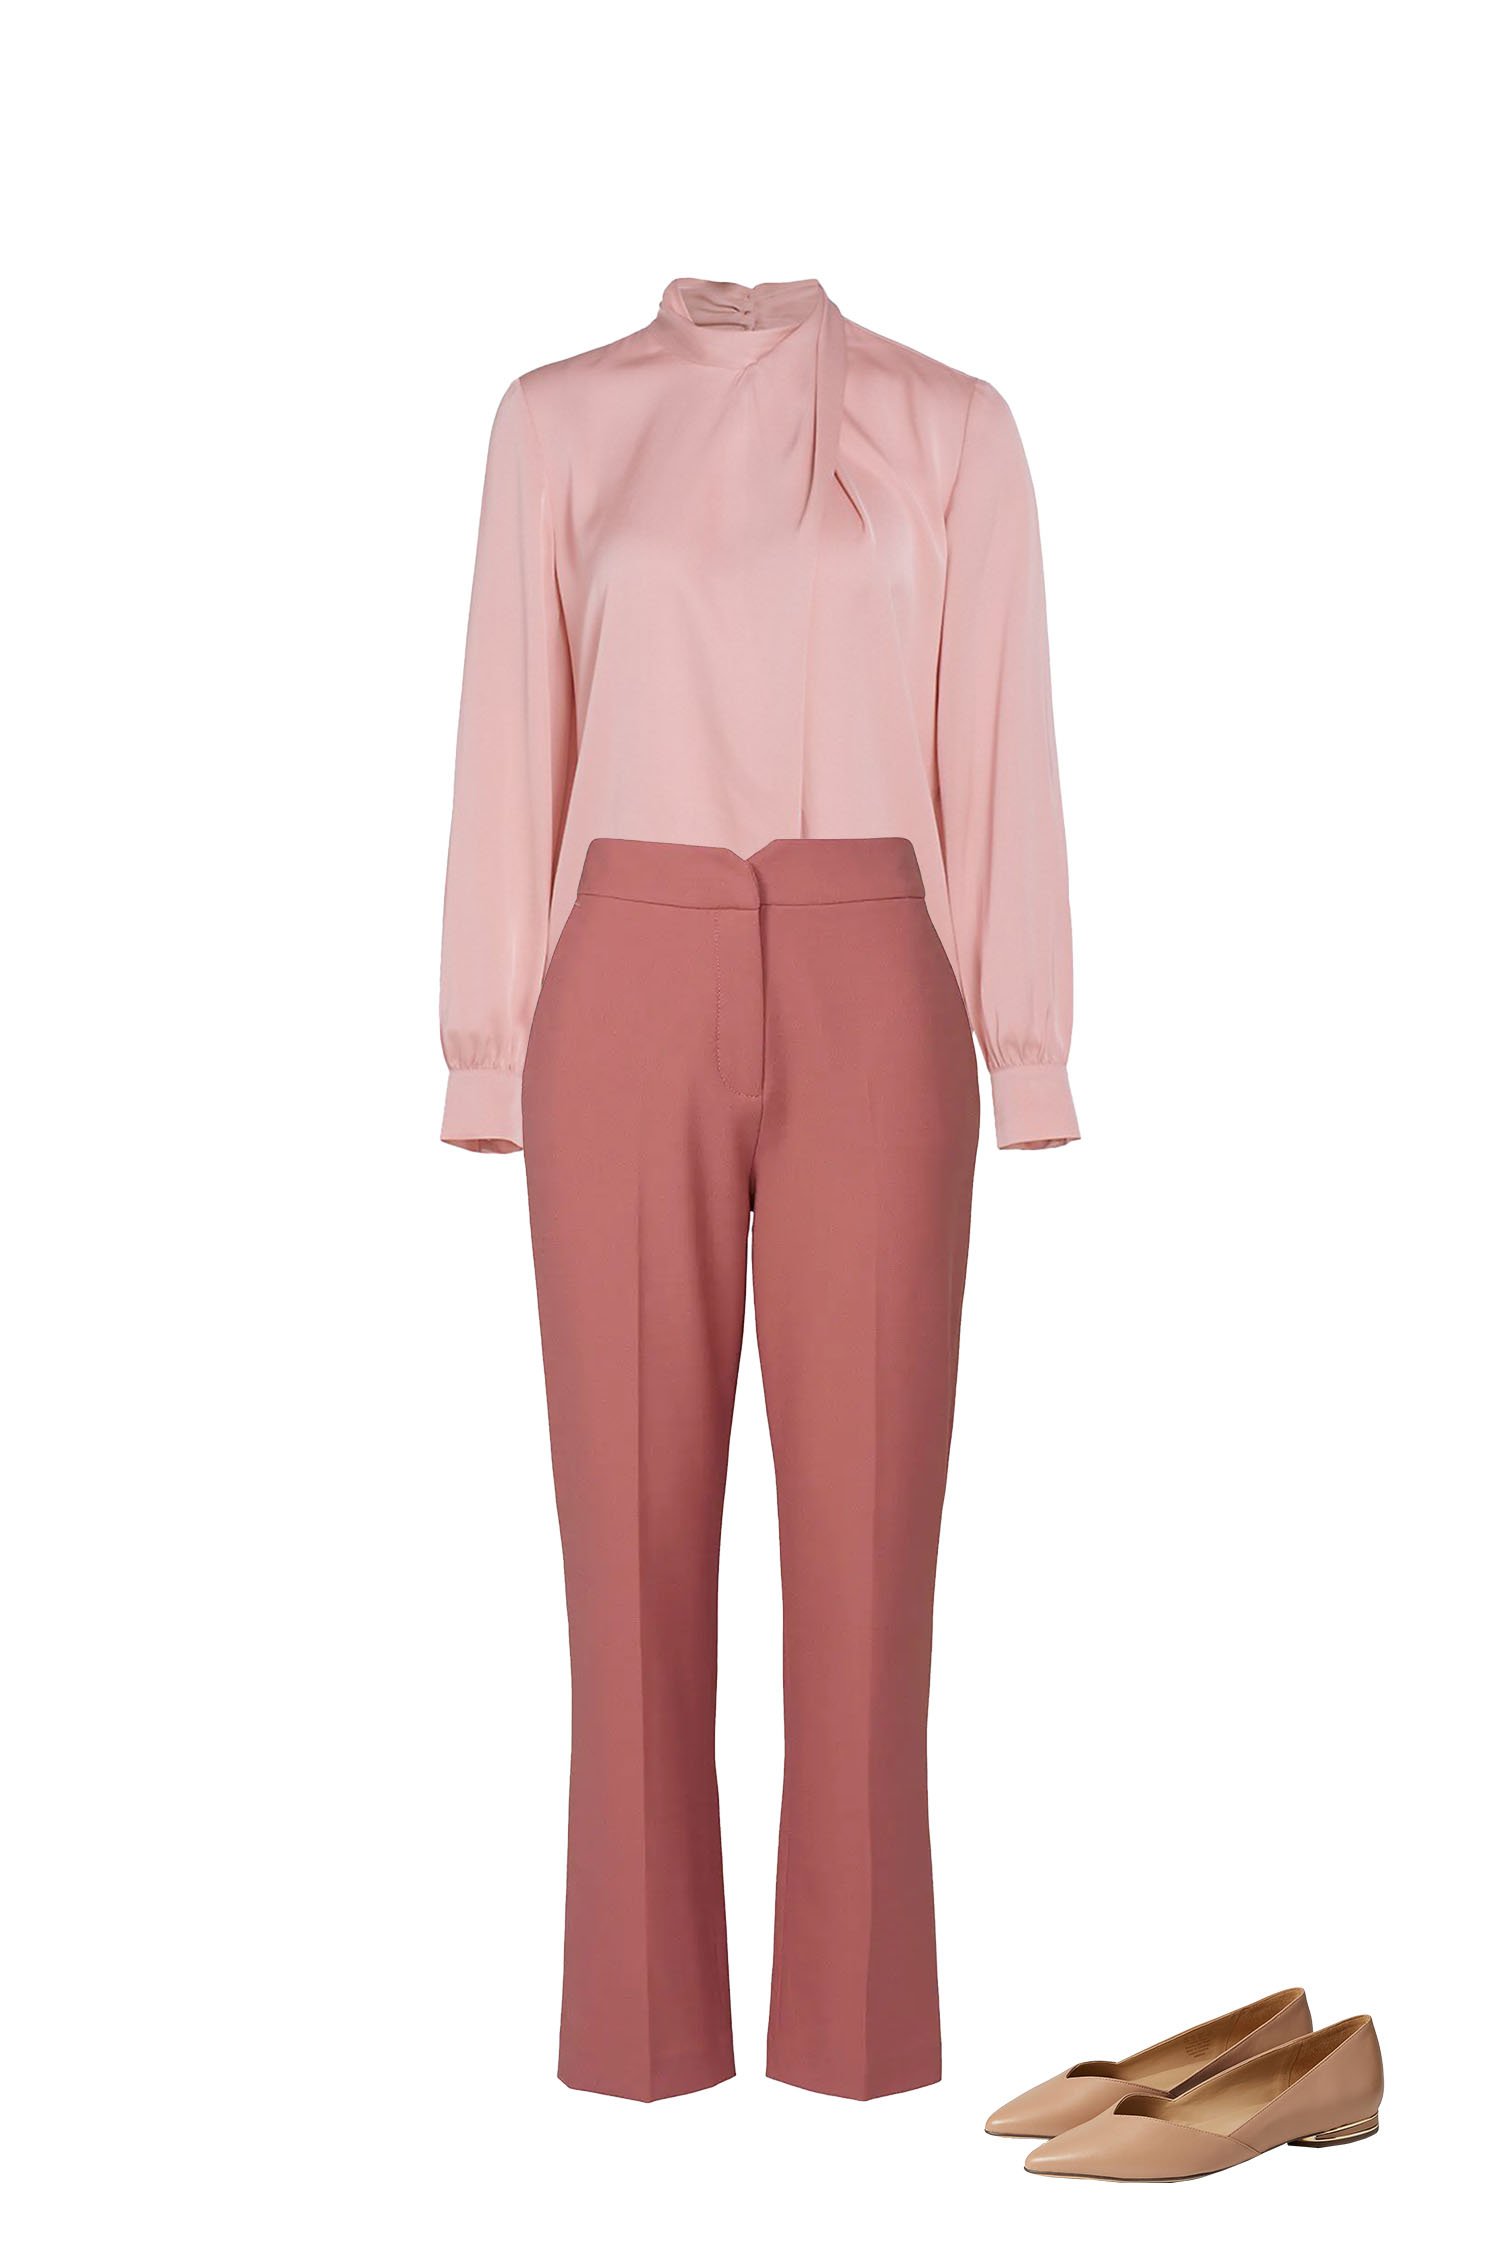 Spring Work Outfit - Rose Pink Ankle Pants, Pink Satin Blouse, Nude Pointy Toe Flats